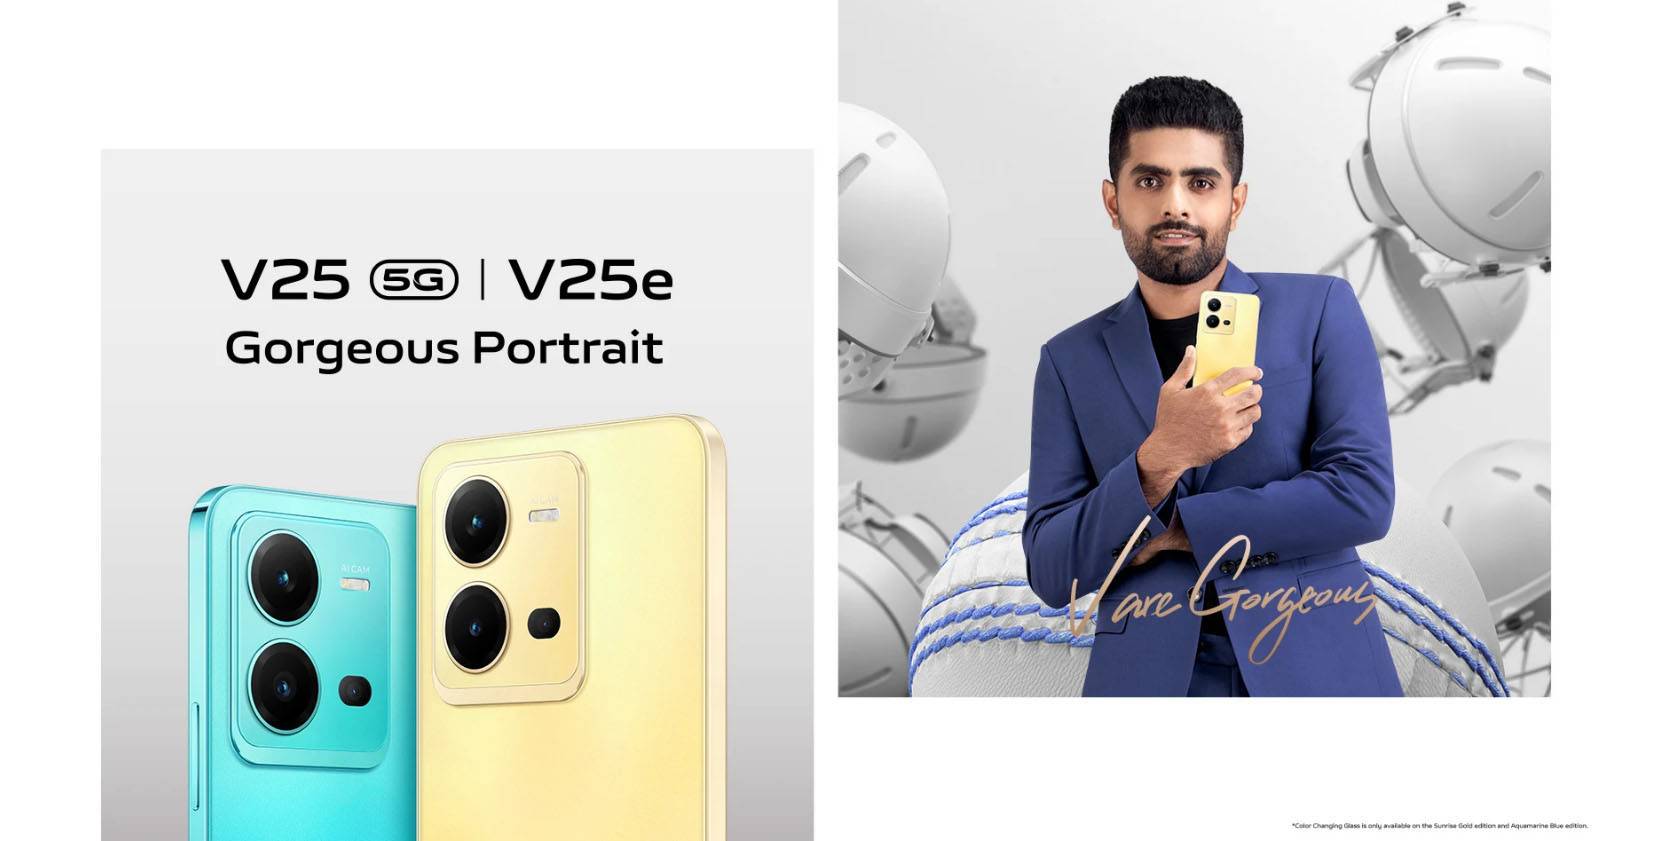 Vivo Launches V25 5G and V25e with the Latest Color Changing Glass and Powerful Camera Capabilities